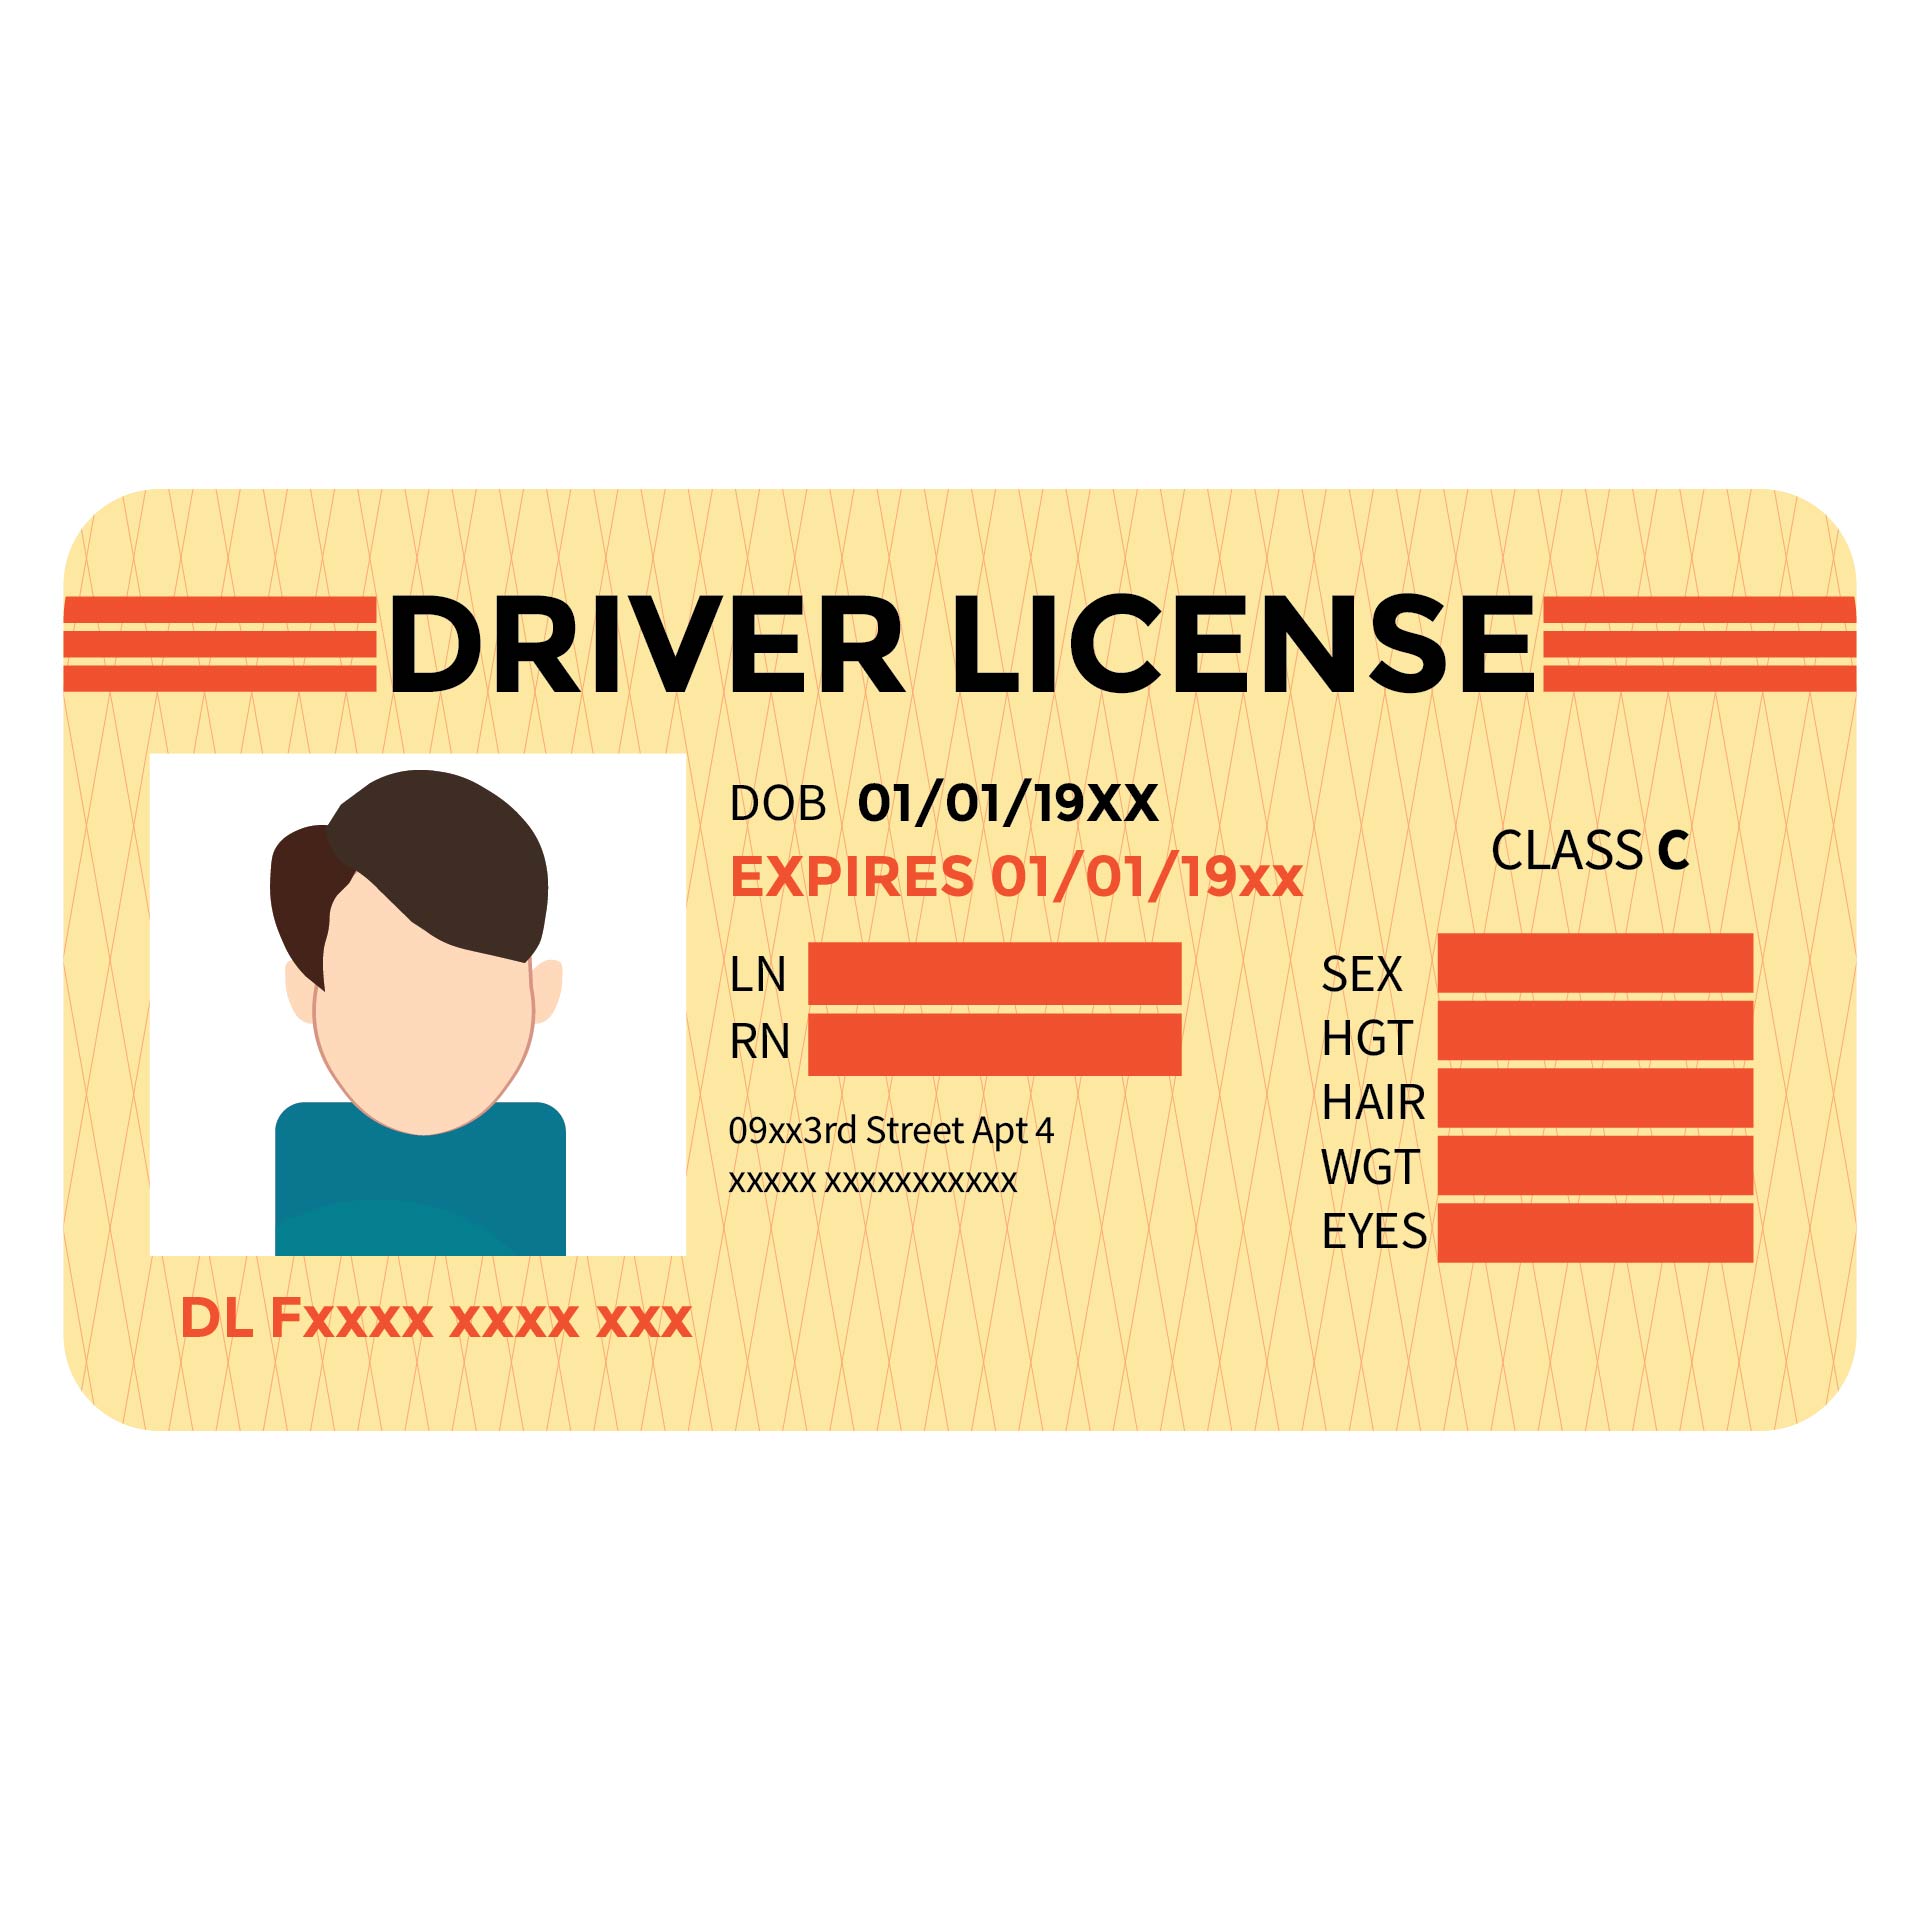 ny drivers license template download free